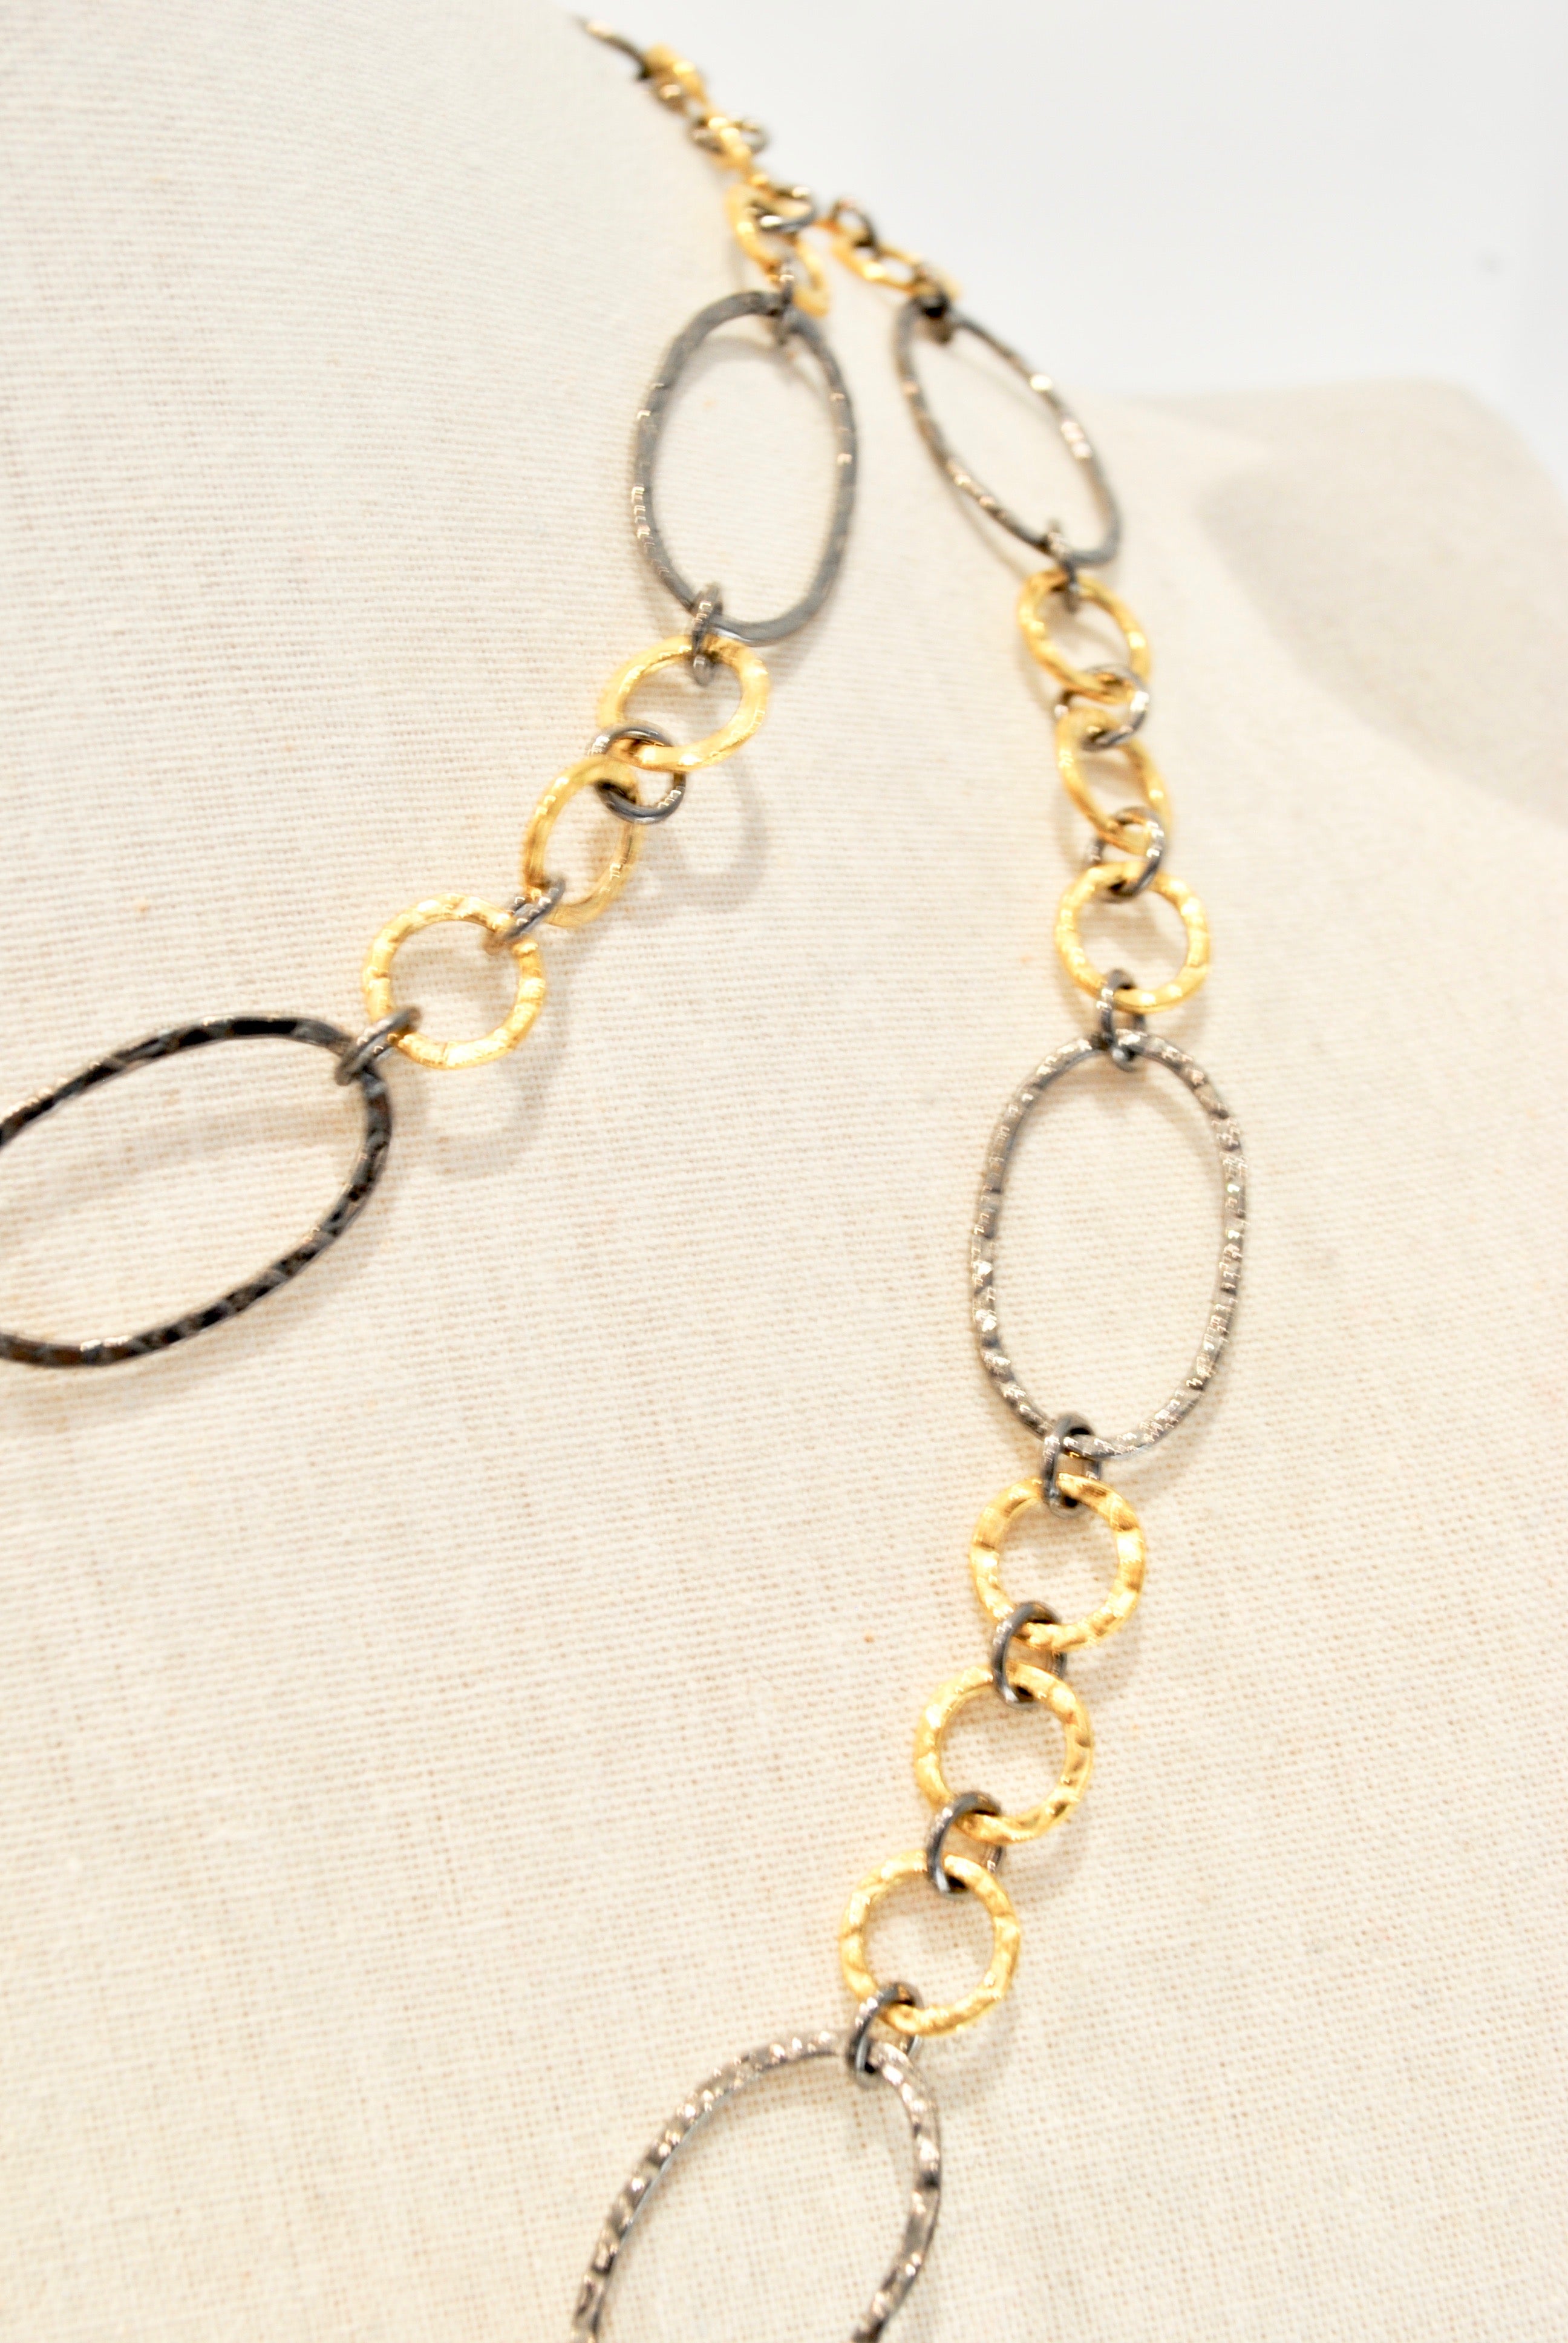 Two-Tone Chain Necklace